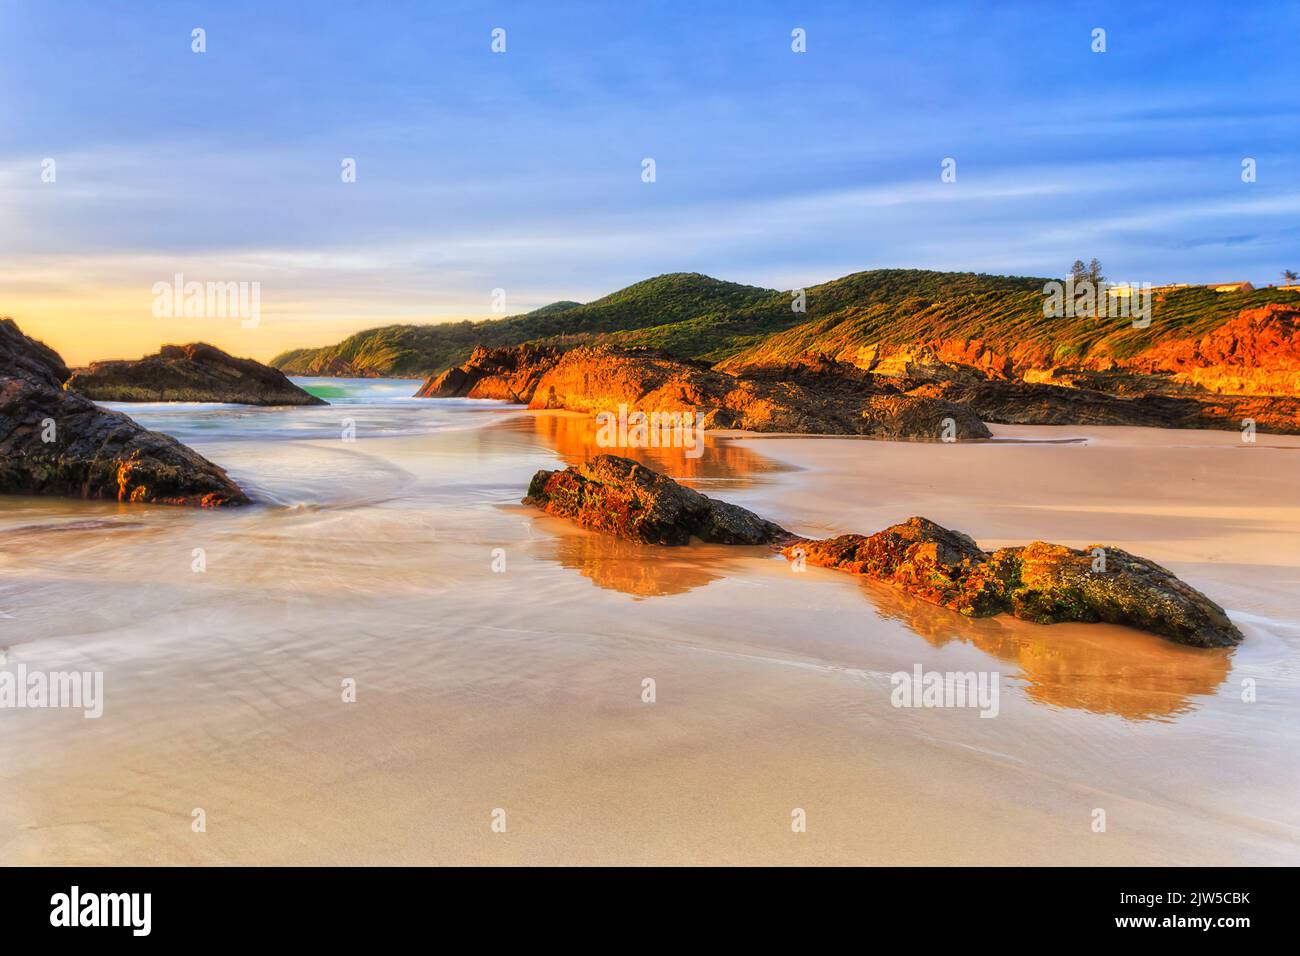 Clean sandy Burgess beach with scenic rocks at sunrise on Pacific coast in Forster town of Australia. Stock Photo